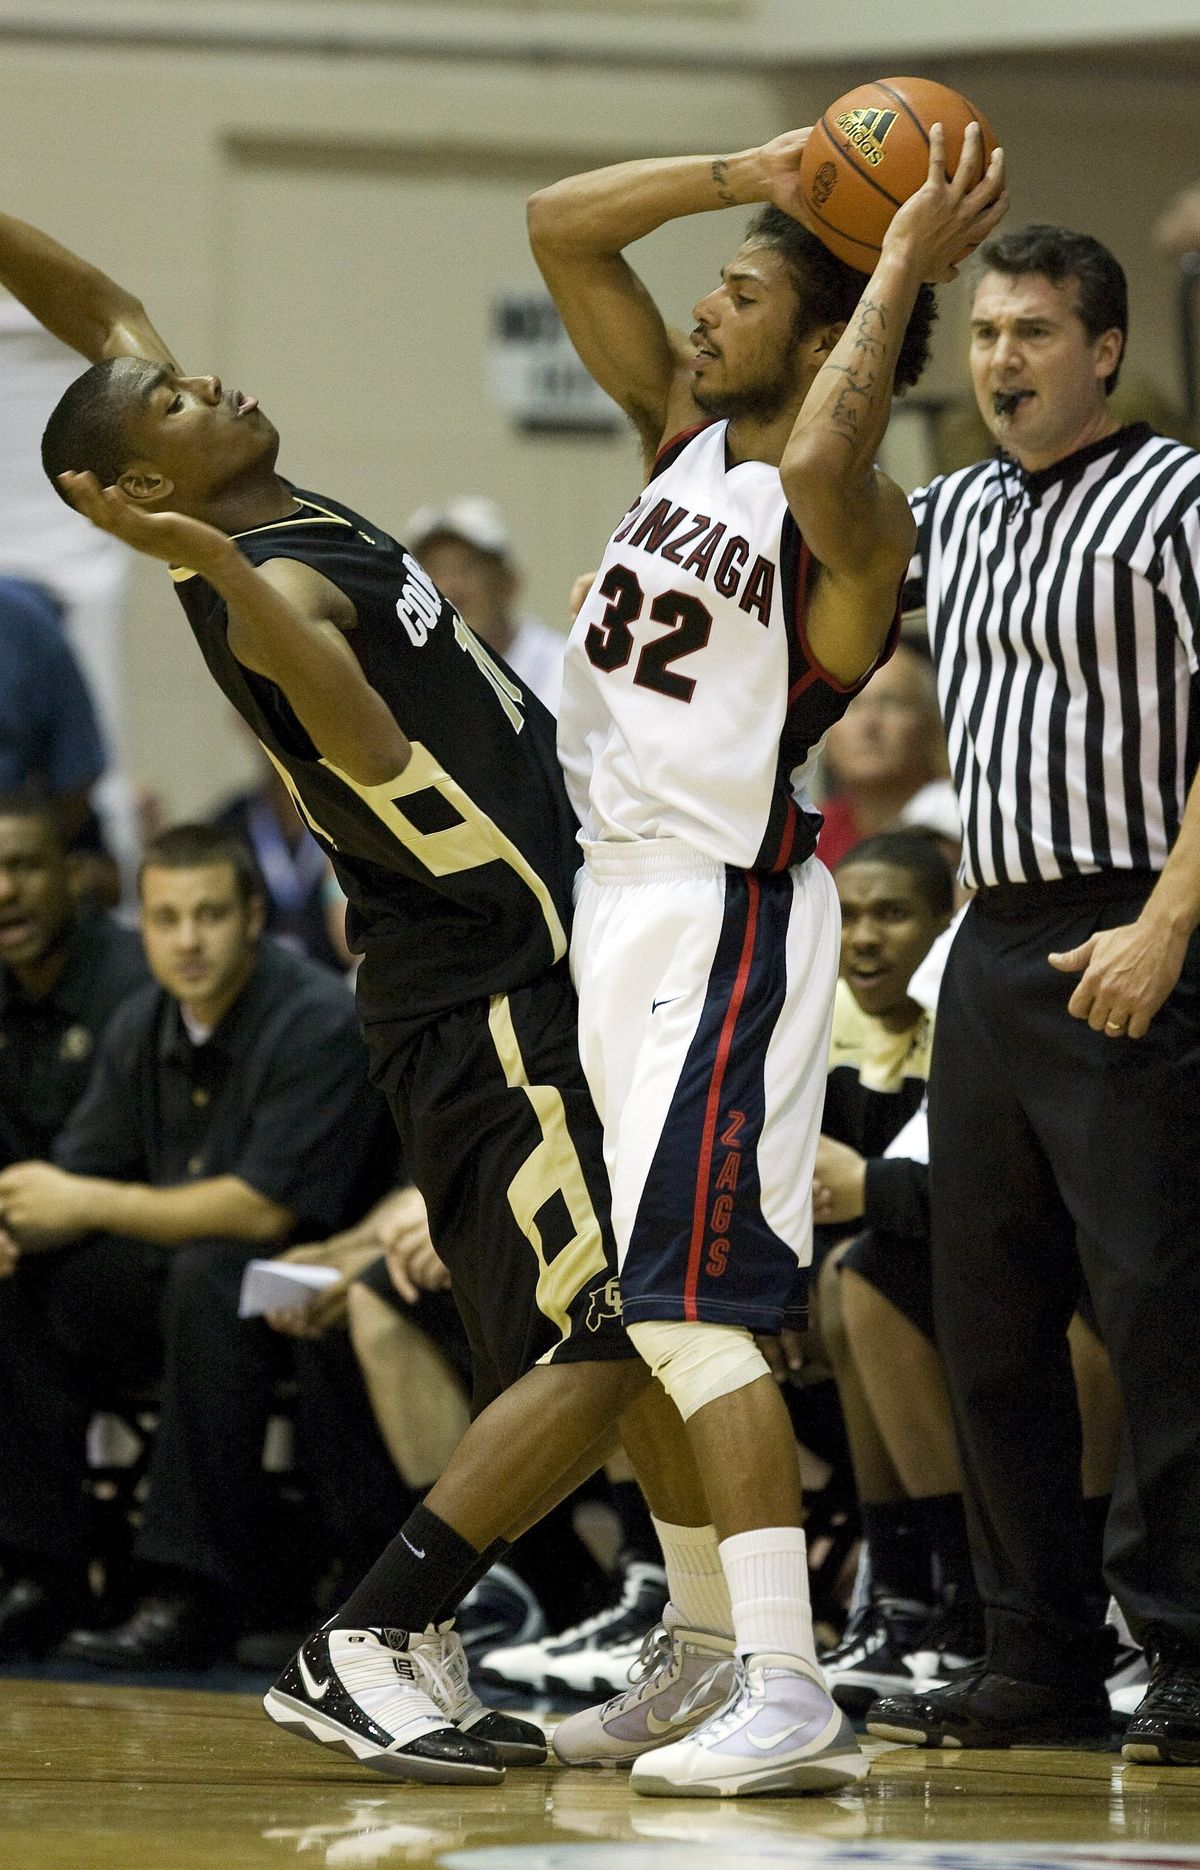 Colorado guard Cory Higgins (11) leans back to avoid Gonzaga guard Steven Gray (32) in the first half during their game in the Maui Invitational NCAA college basketball tournament at the Lahaina Civic Center in Lahaina, Hawaii on Monday Nov. 23, 2009. (Eugene Tanner / Fr168001 Ap)